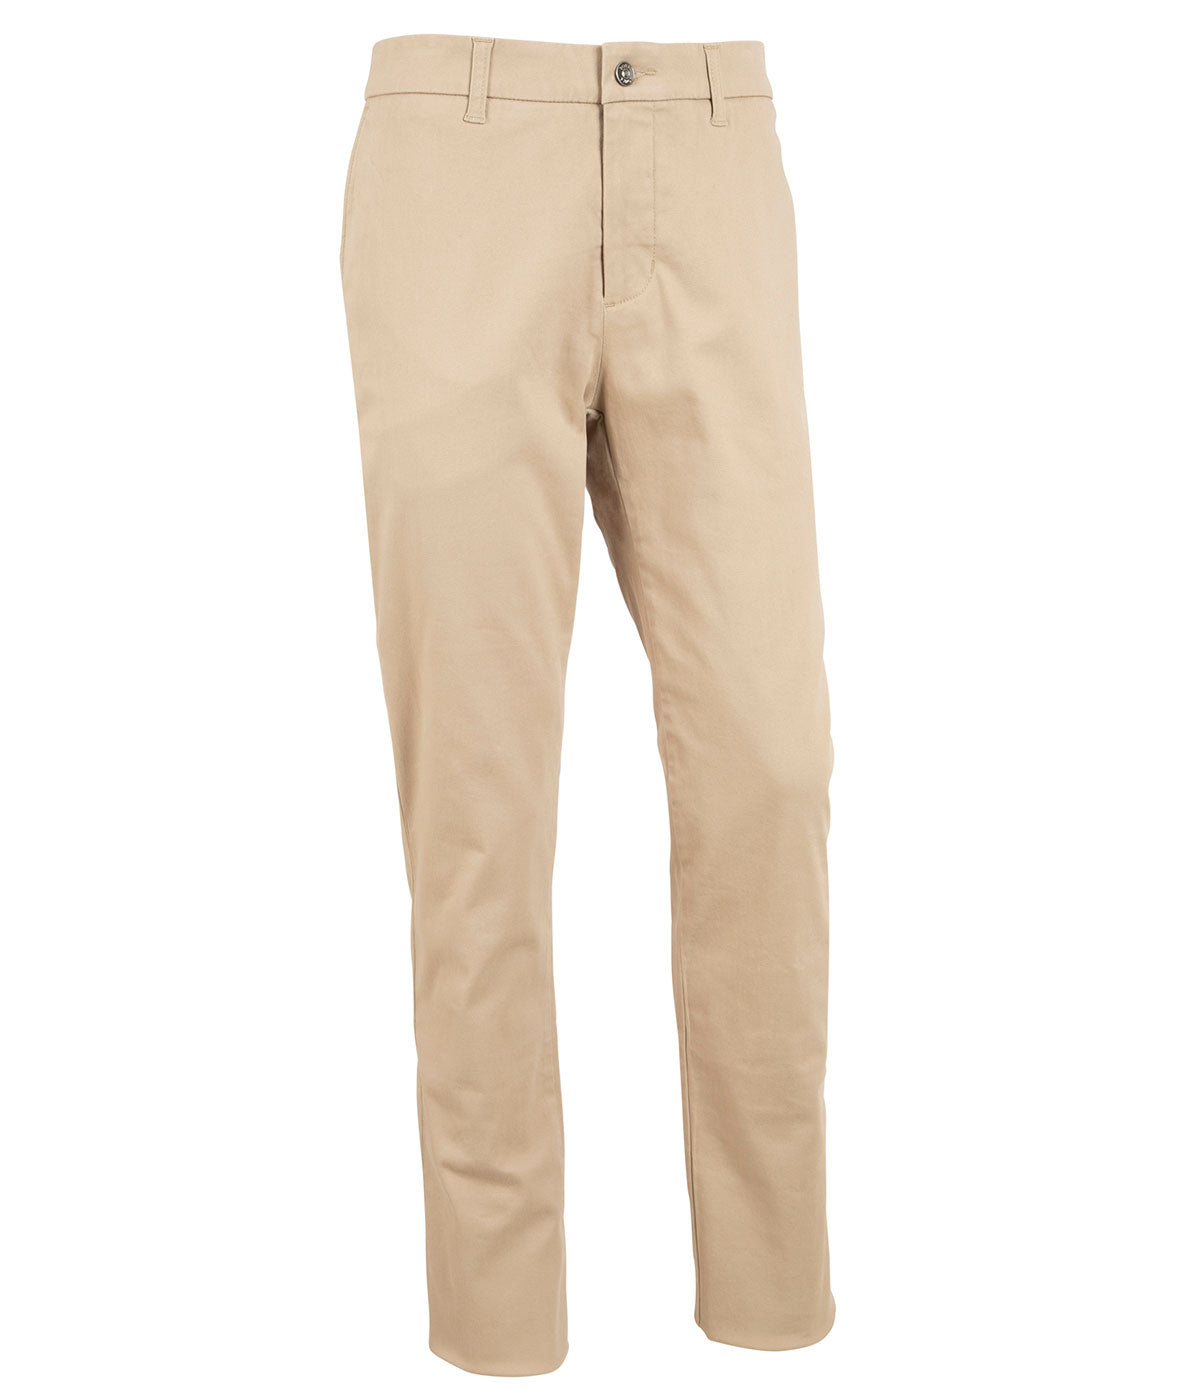 Signature St. Charles 2.0 Brushed Cotton Stretch Dress Pants